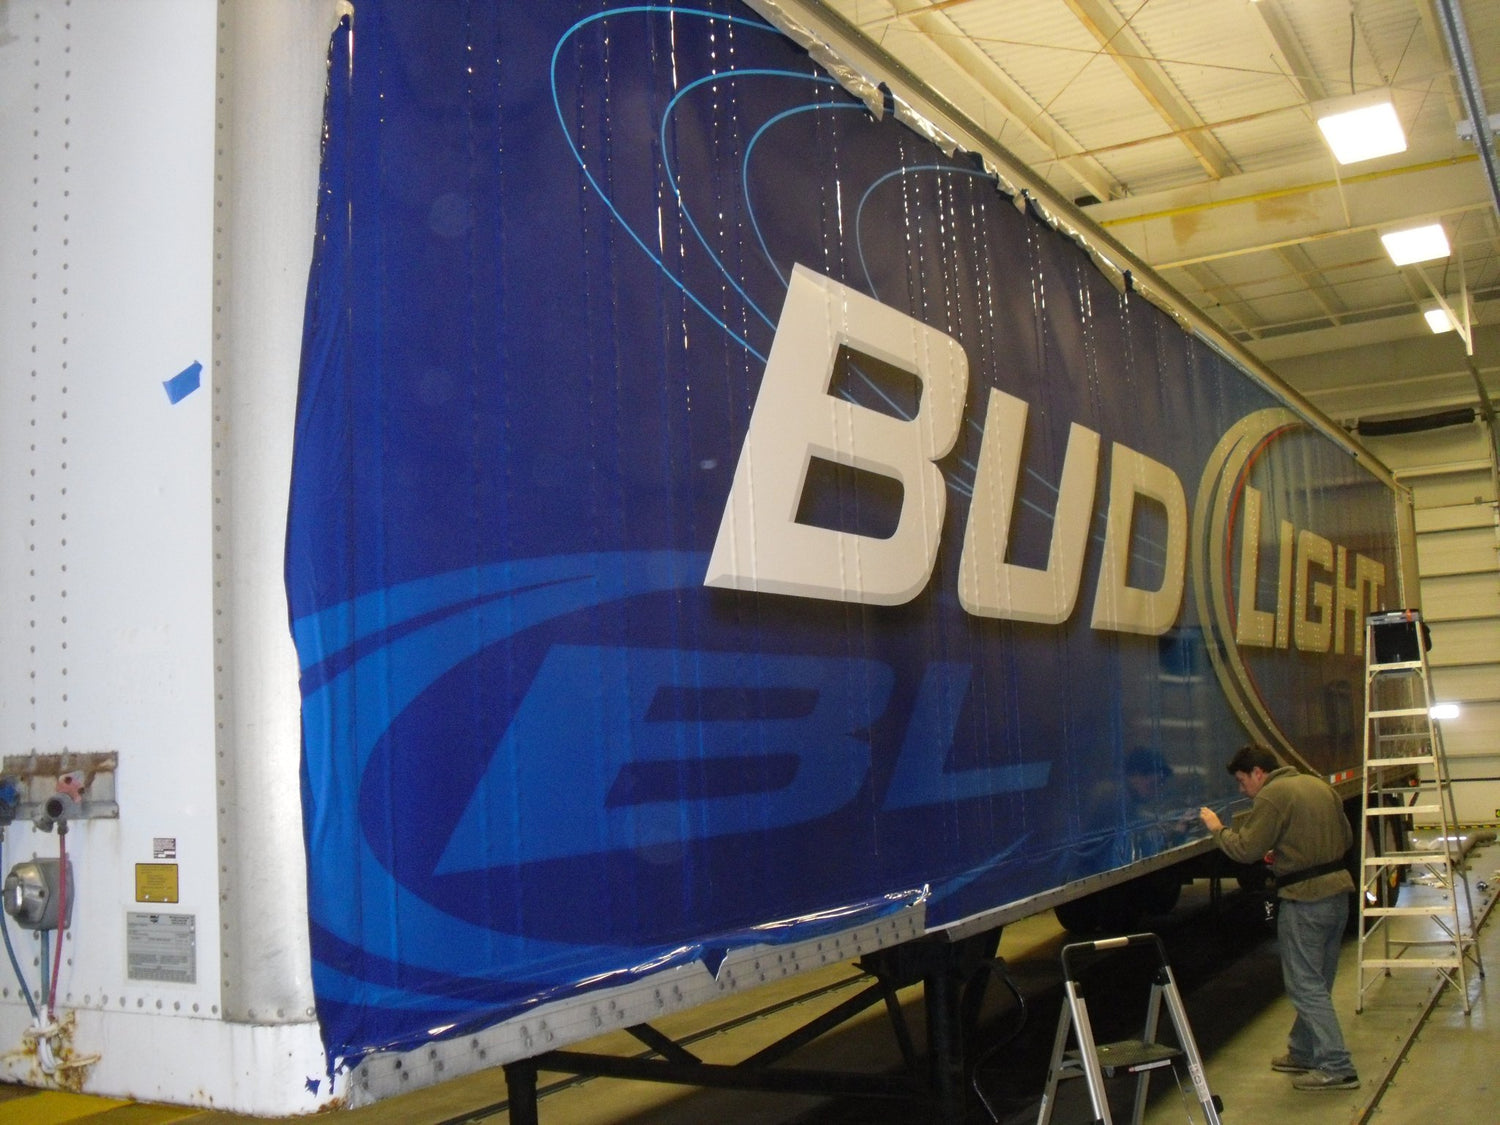 Tractor trailer vinyl wrap installed by All Signs & Graphics Inc. Large blue background and Bud Light make up the design for this corporate fleet graphic vinyl wrap.